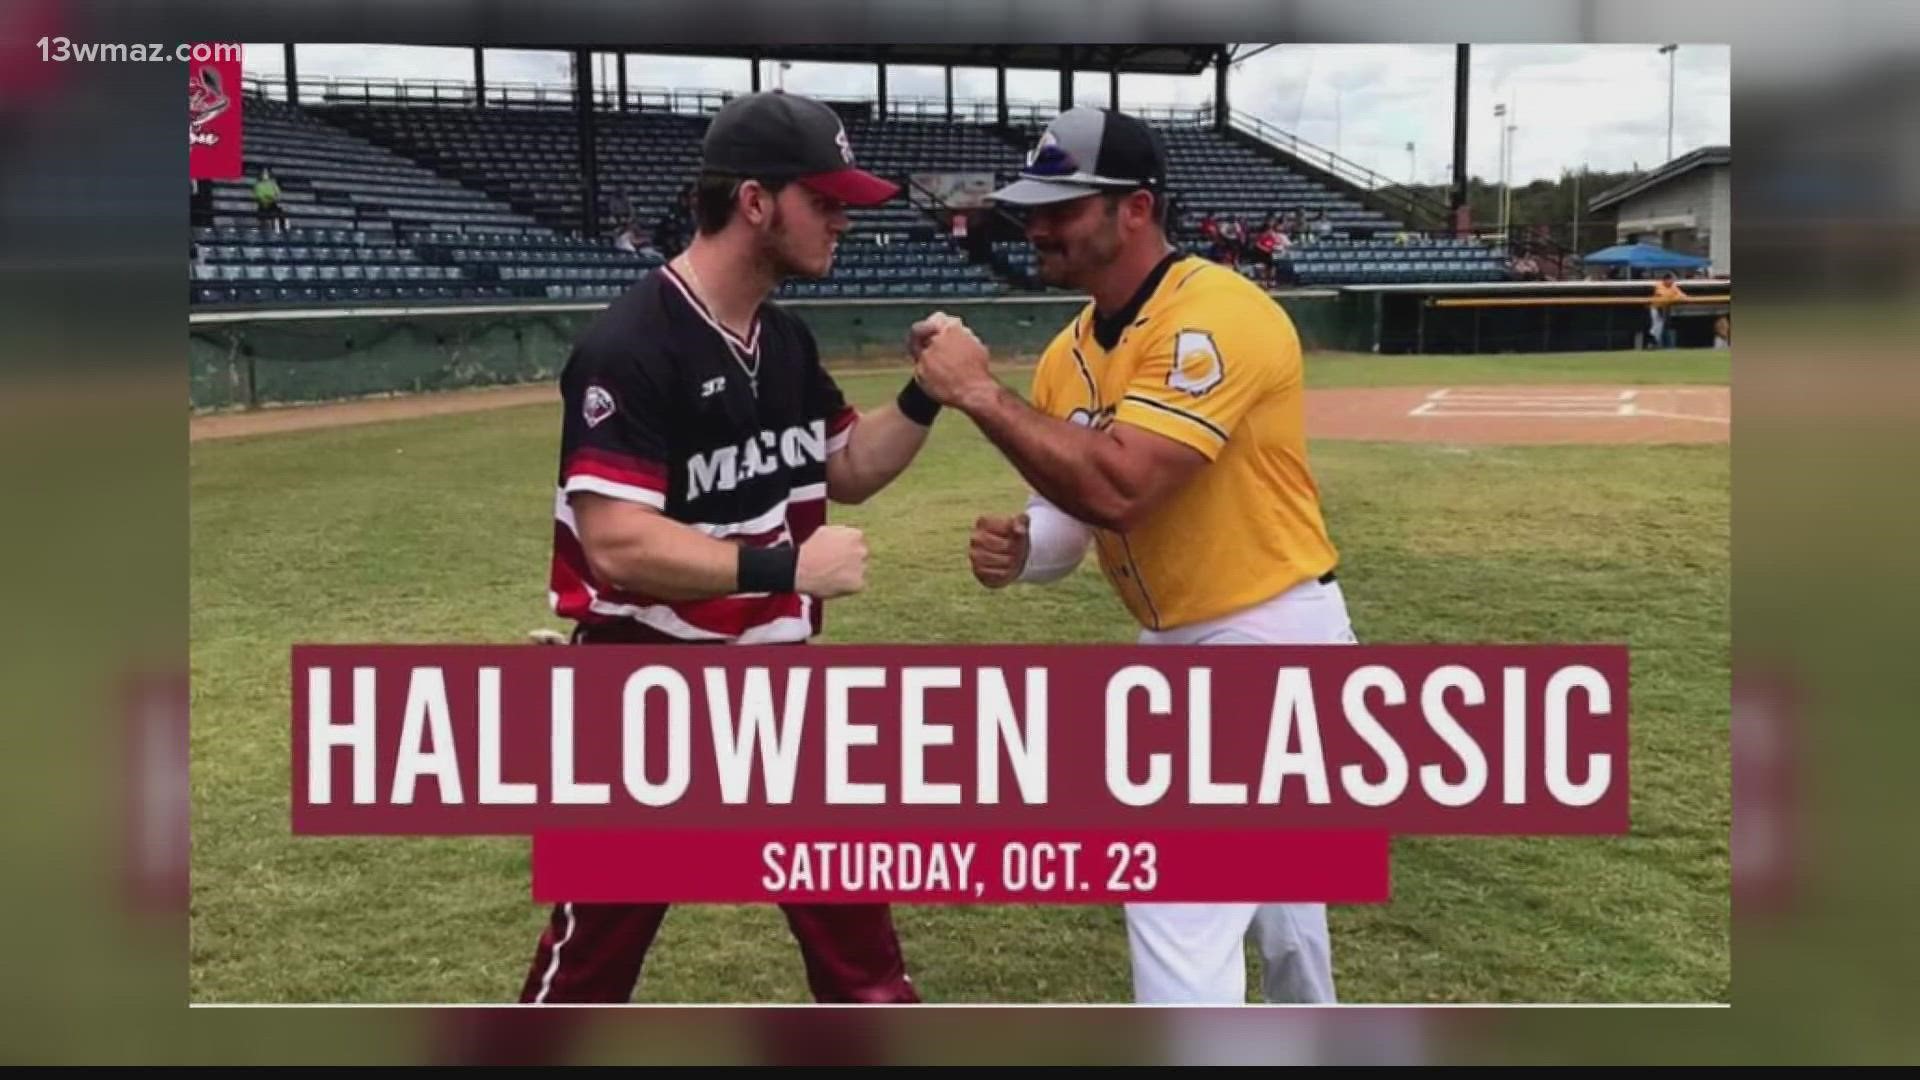 The Macon Bacon is holding its Halloween Classic on Saturday, Oct. 23. The Bacon will face off against the Eggs in a 7-inning game.